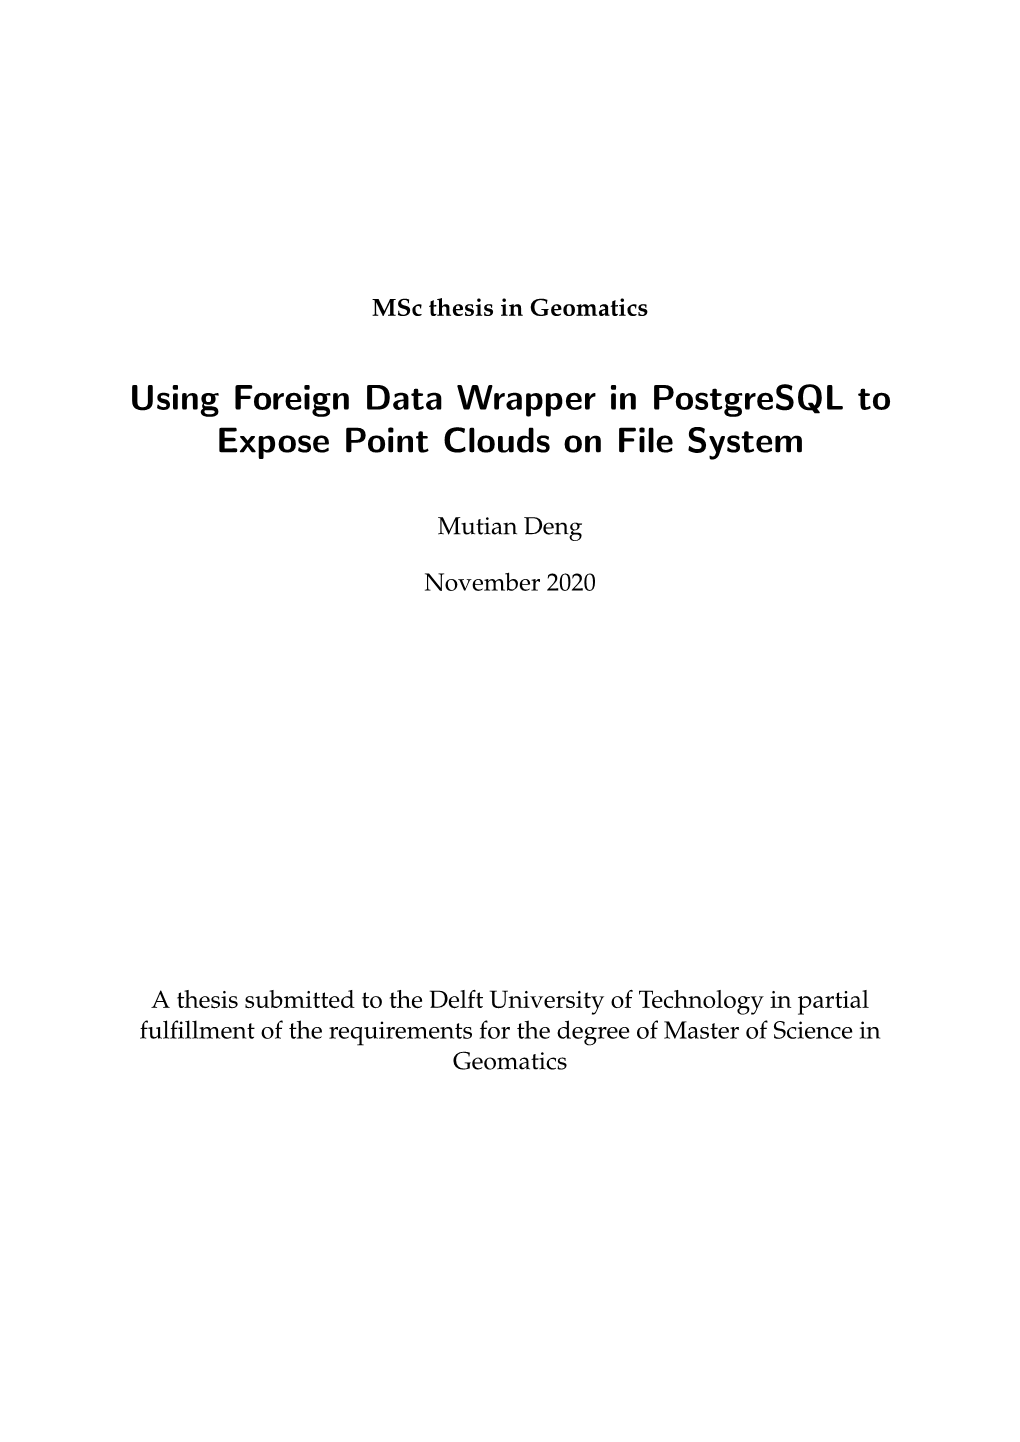 Using Foreign Data Wrapper in Postgresql to Expose Point Clouds on File System